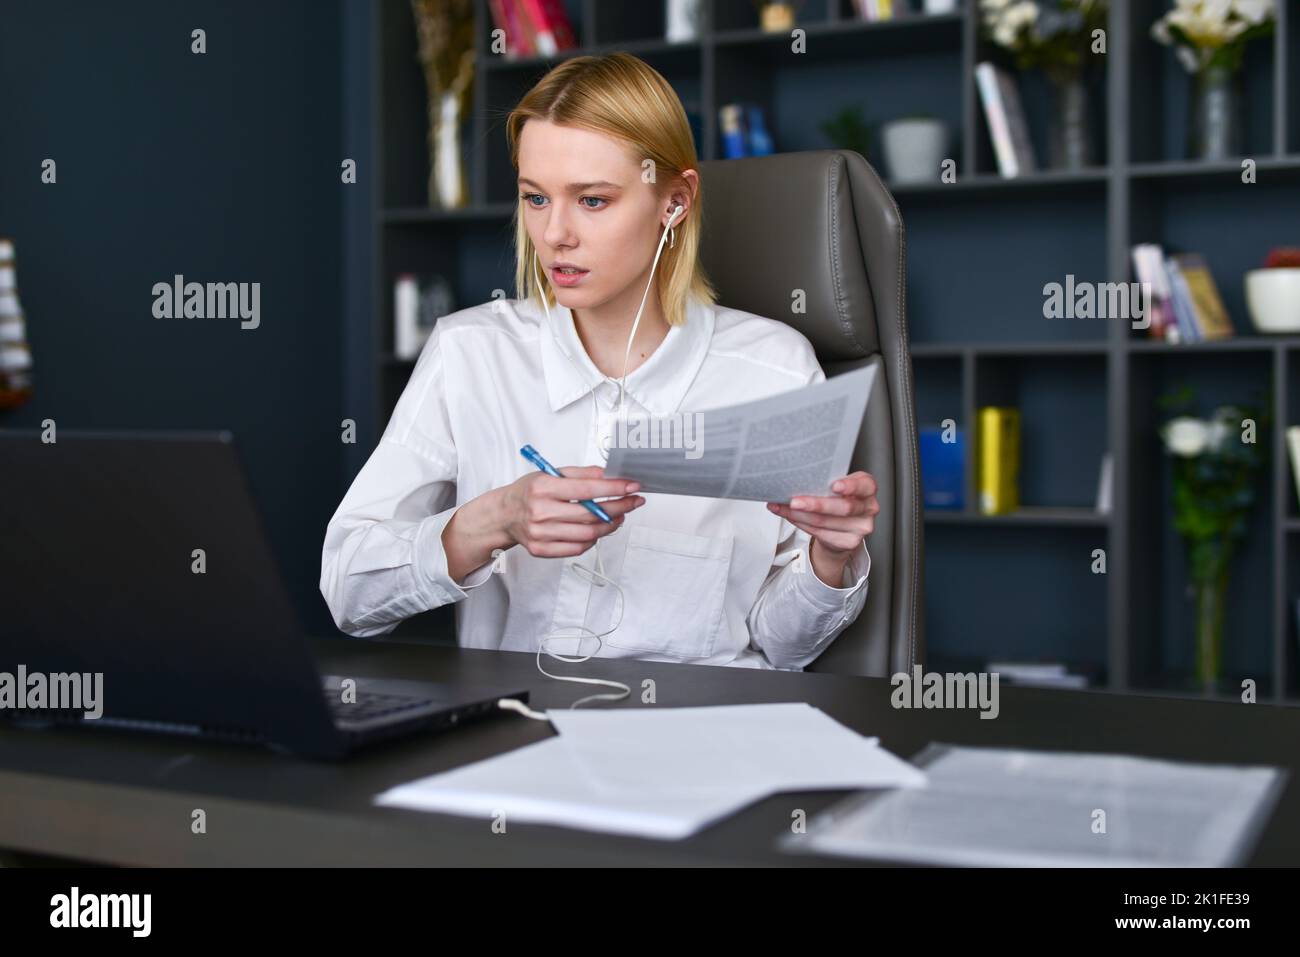 Woman working on laptop and paperwork in office. Stock Photo